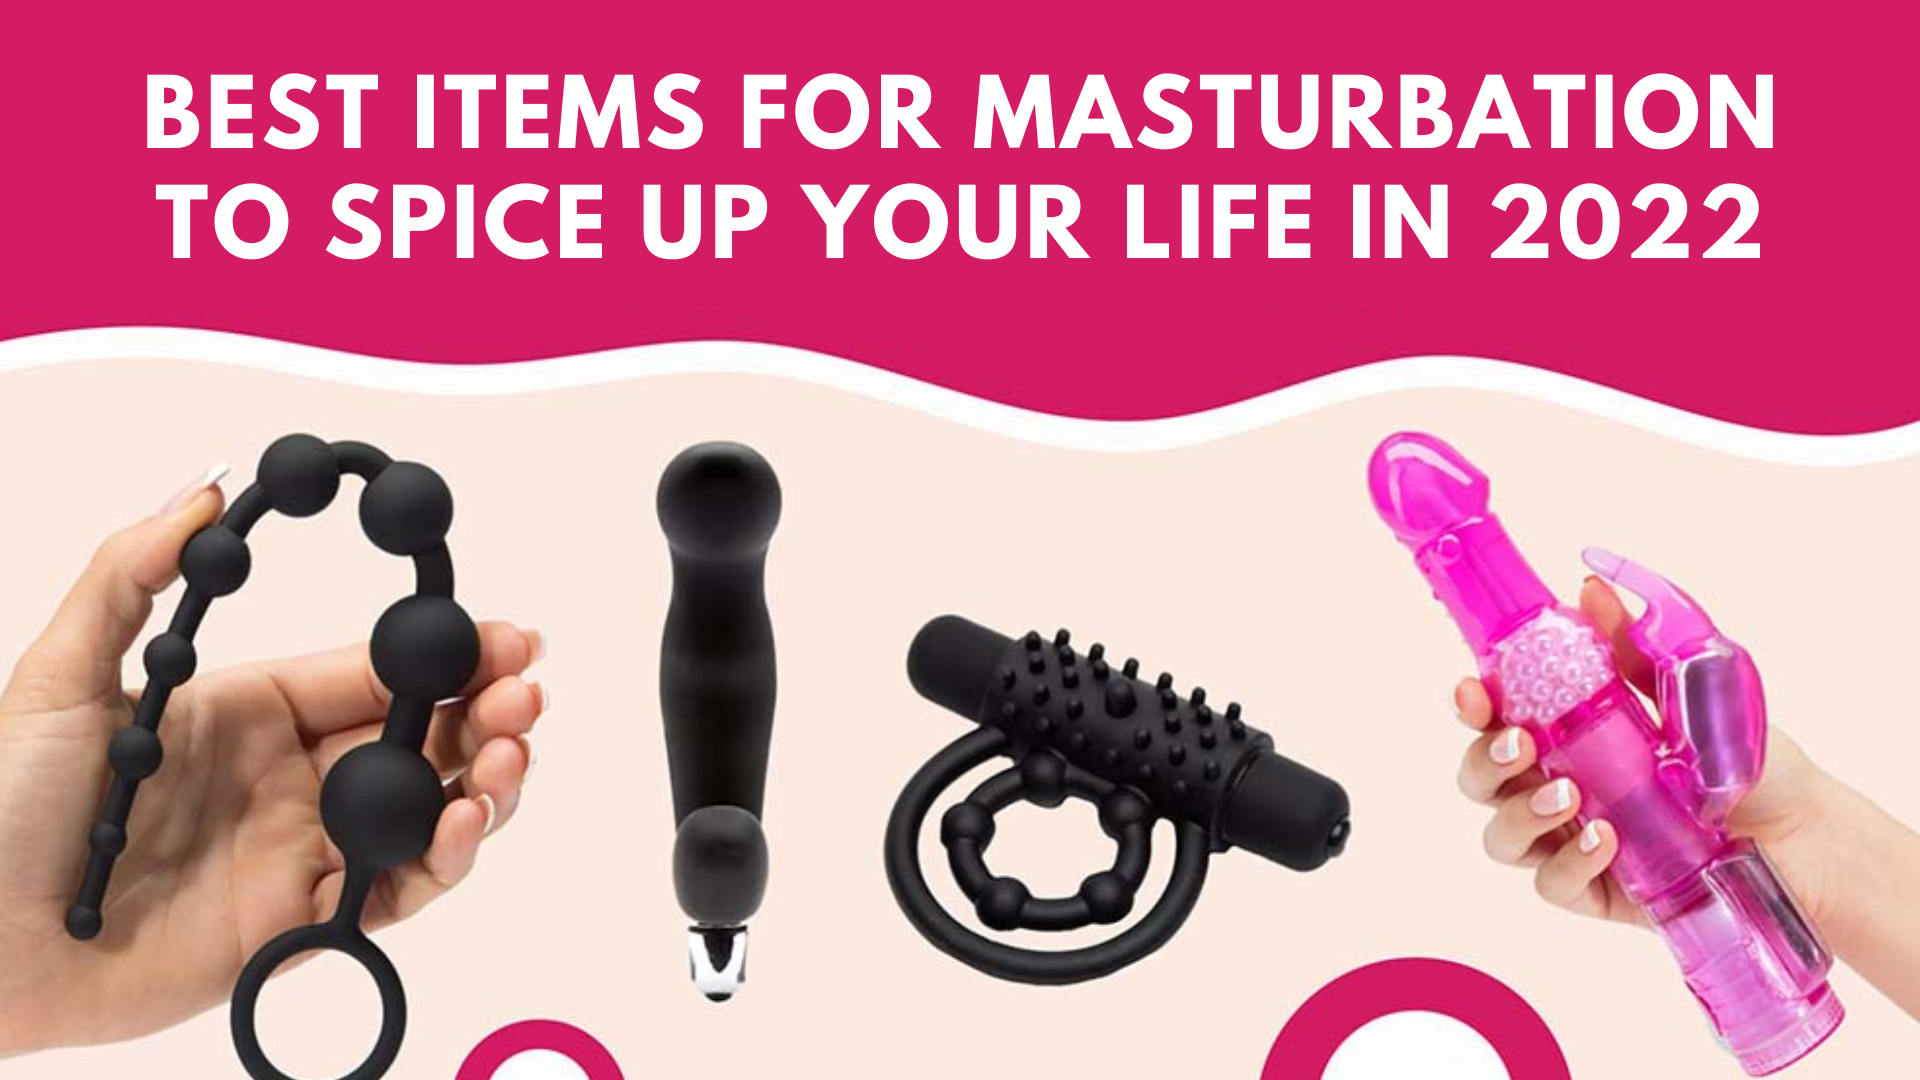 Best Items For Masturbation To Spice Up Your Life In 2022